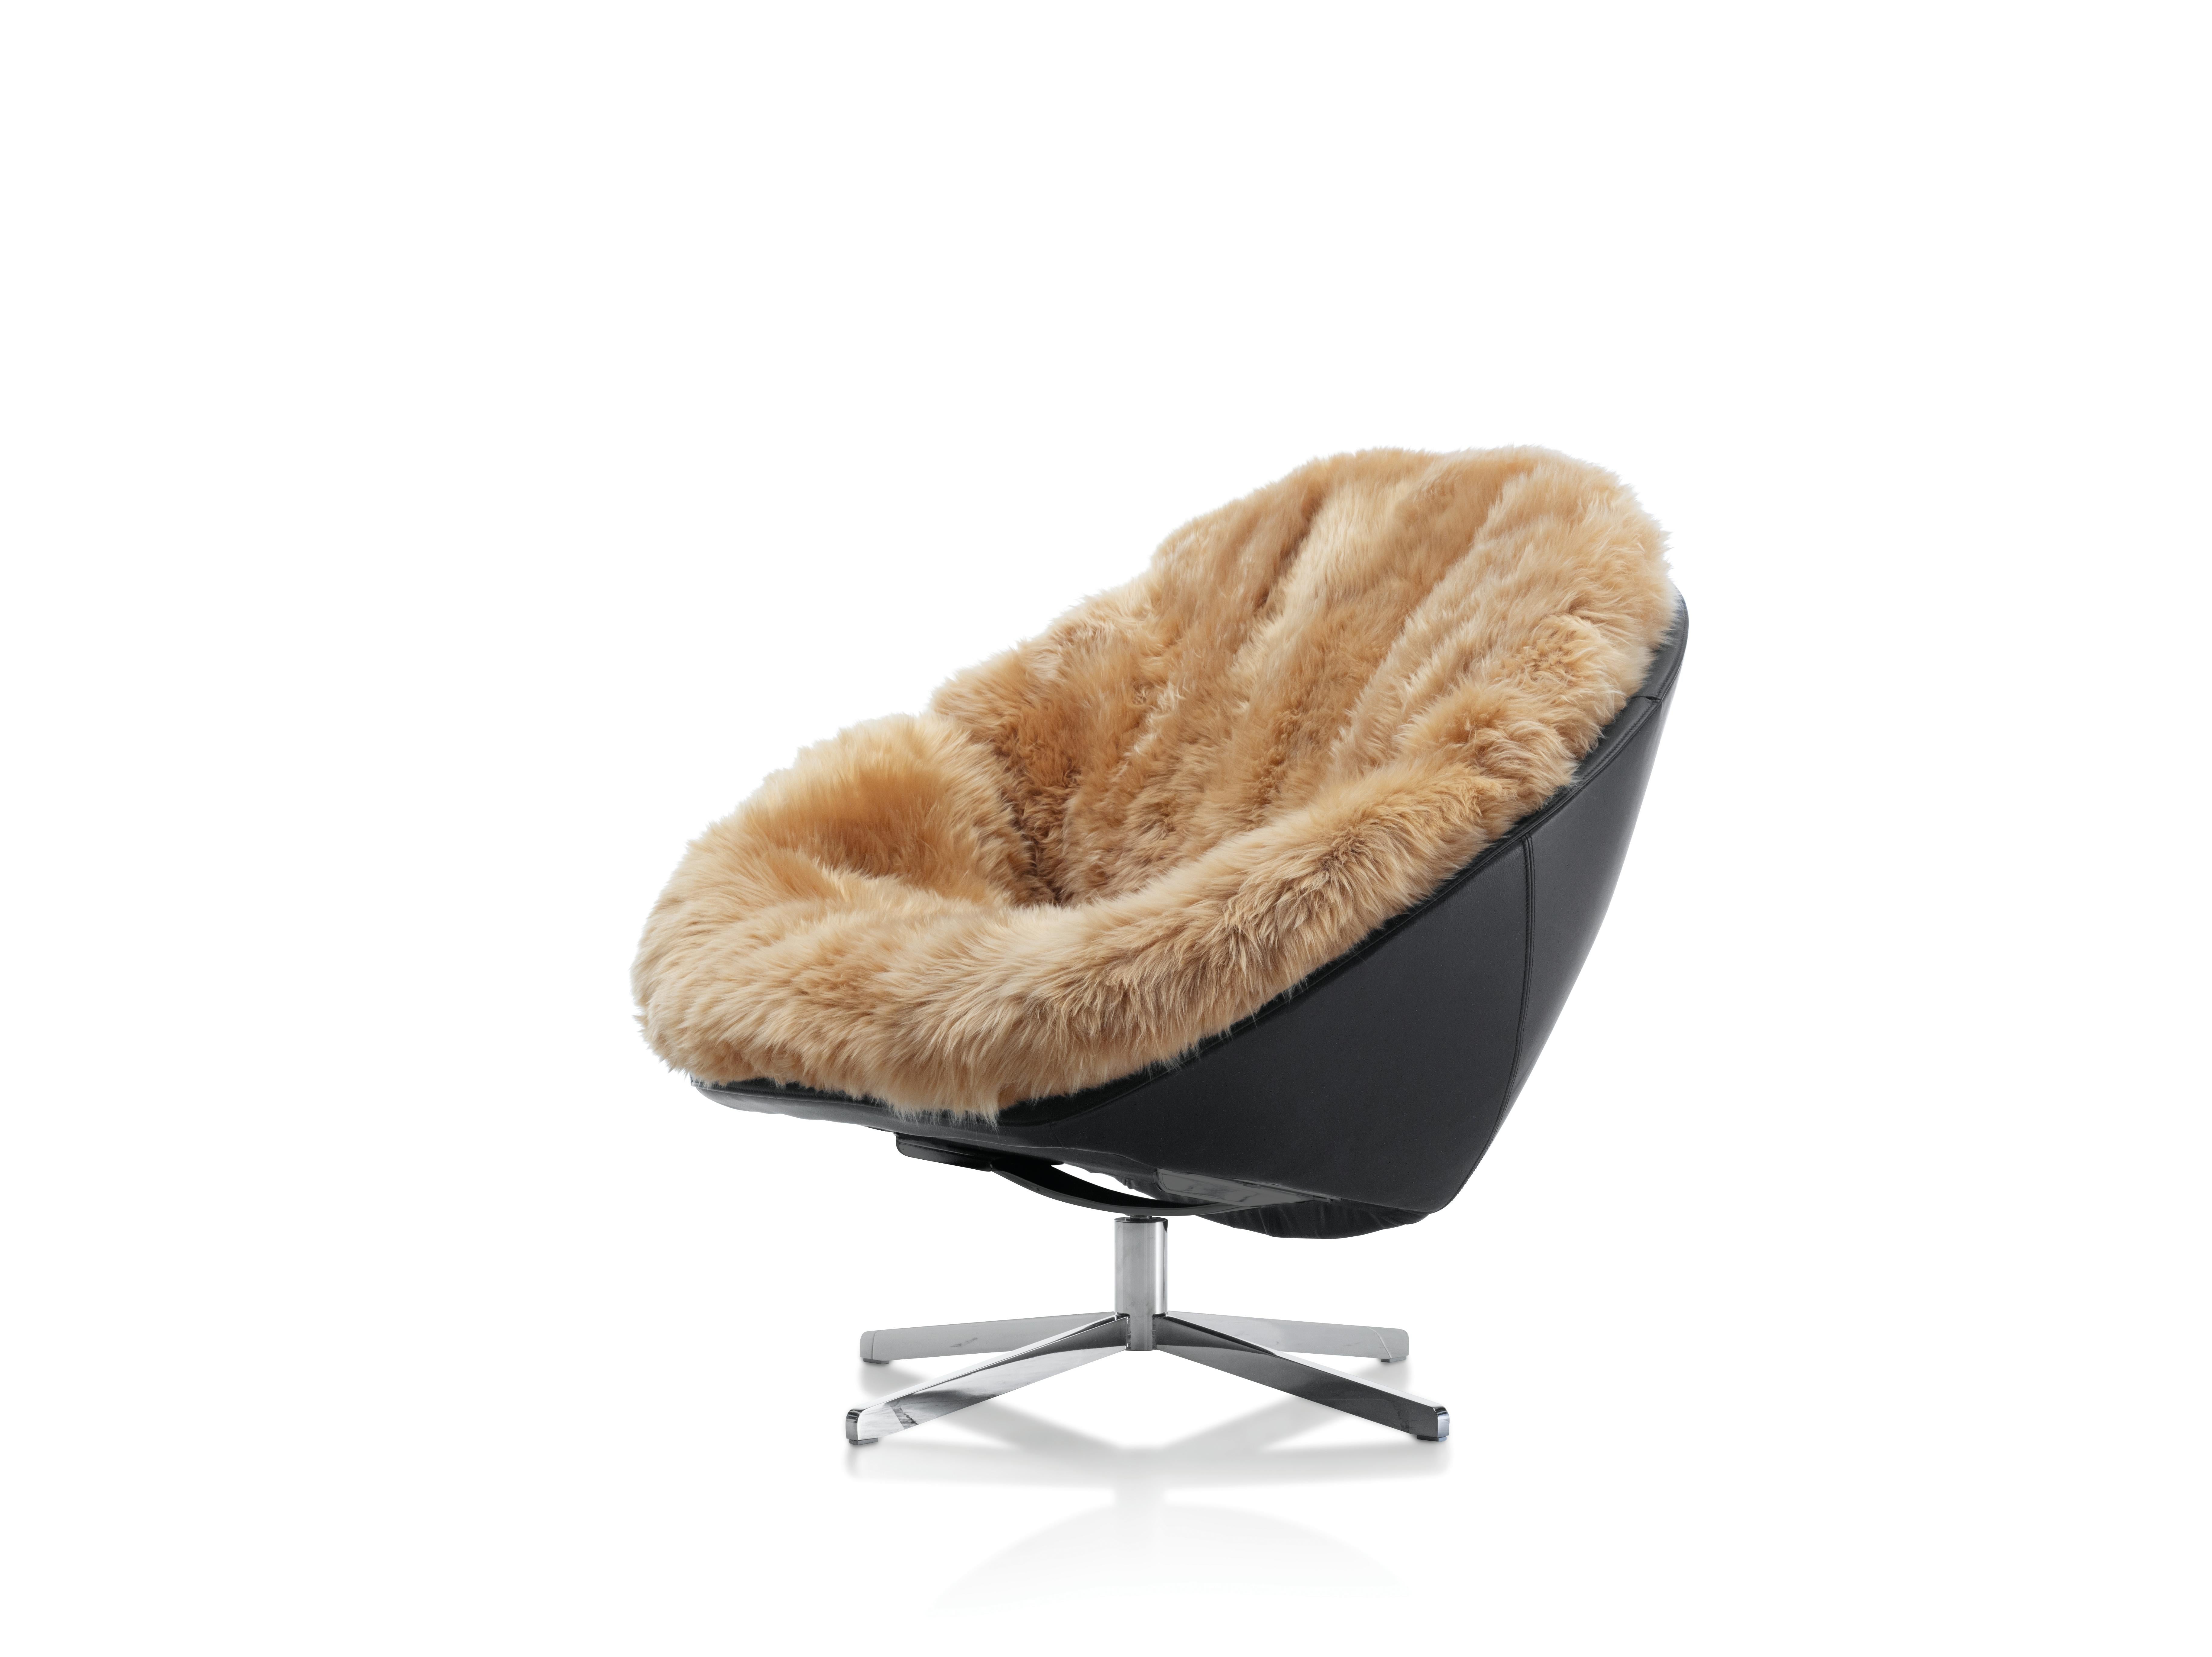 De Sede DS-265 Coco with Sheepskin 'Nomade'. New, current production.

Price mentioned is for a chair with the outer shell in high quality 'Select' leather + cushion in sheepskin 'Nomade'.

The DS-265 Coco is an oasis of comfort. Sven Dogs has